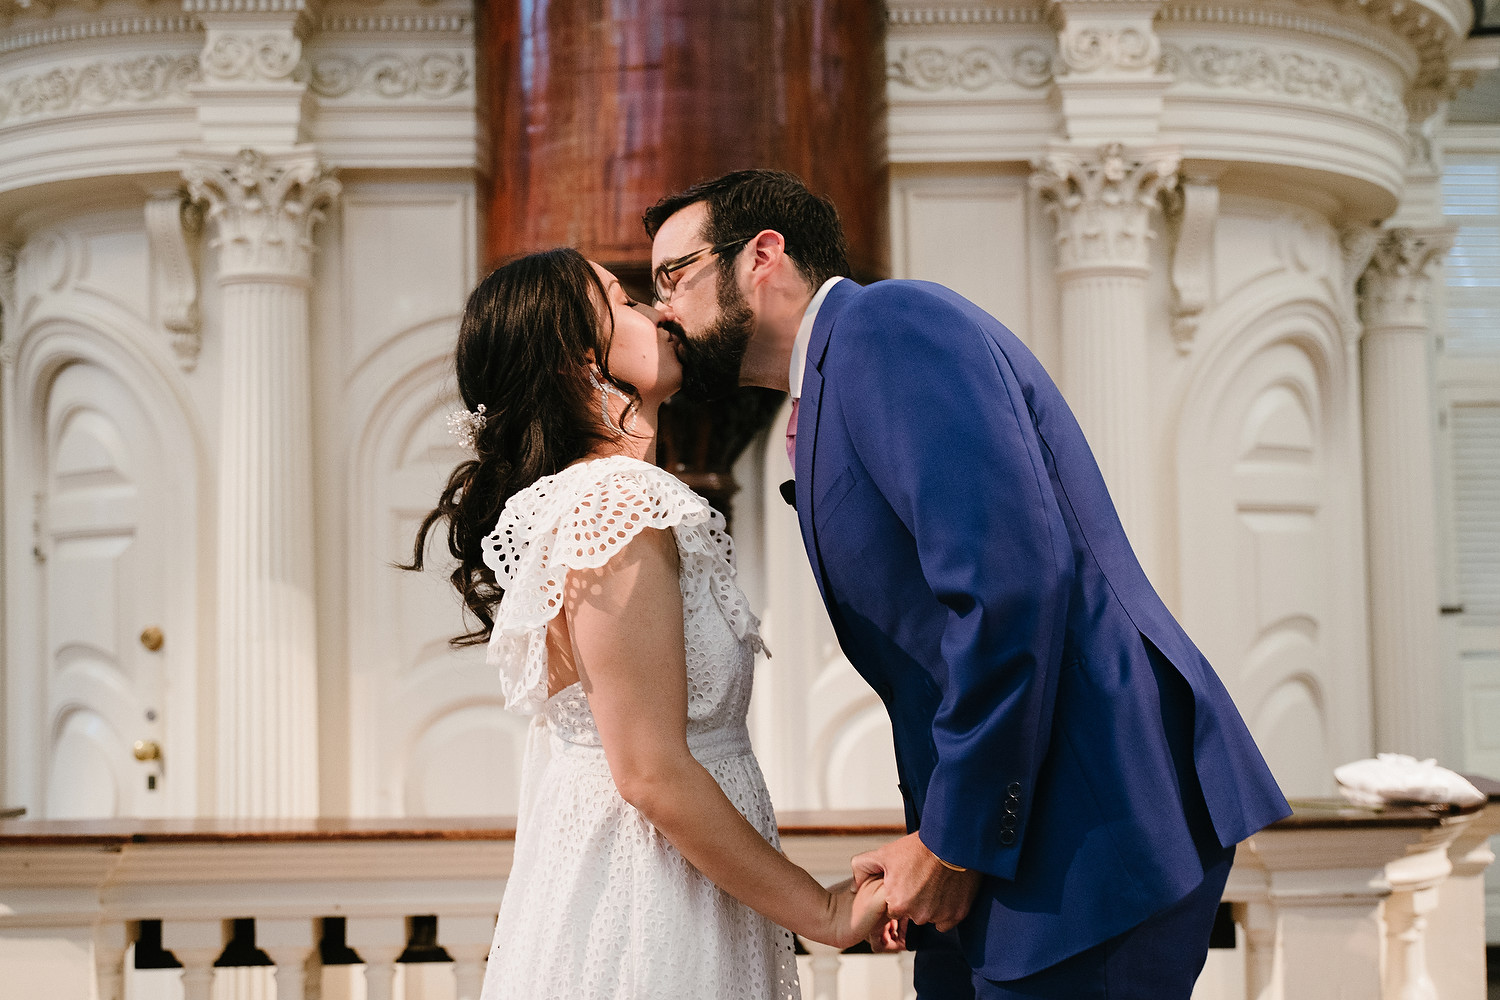 Boston Old South Meeting House wedding photo session 17